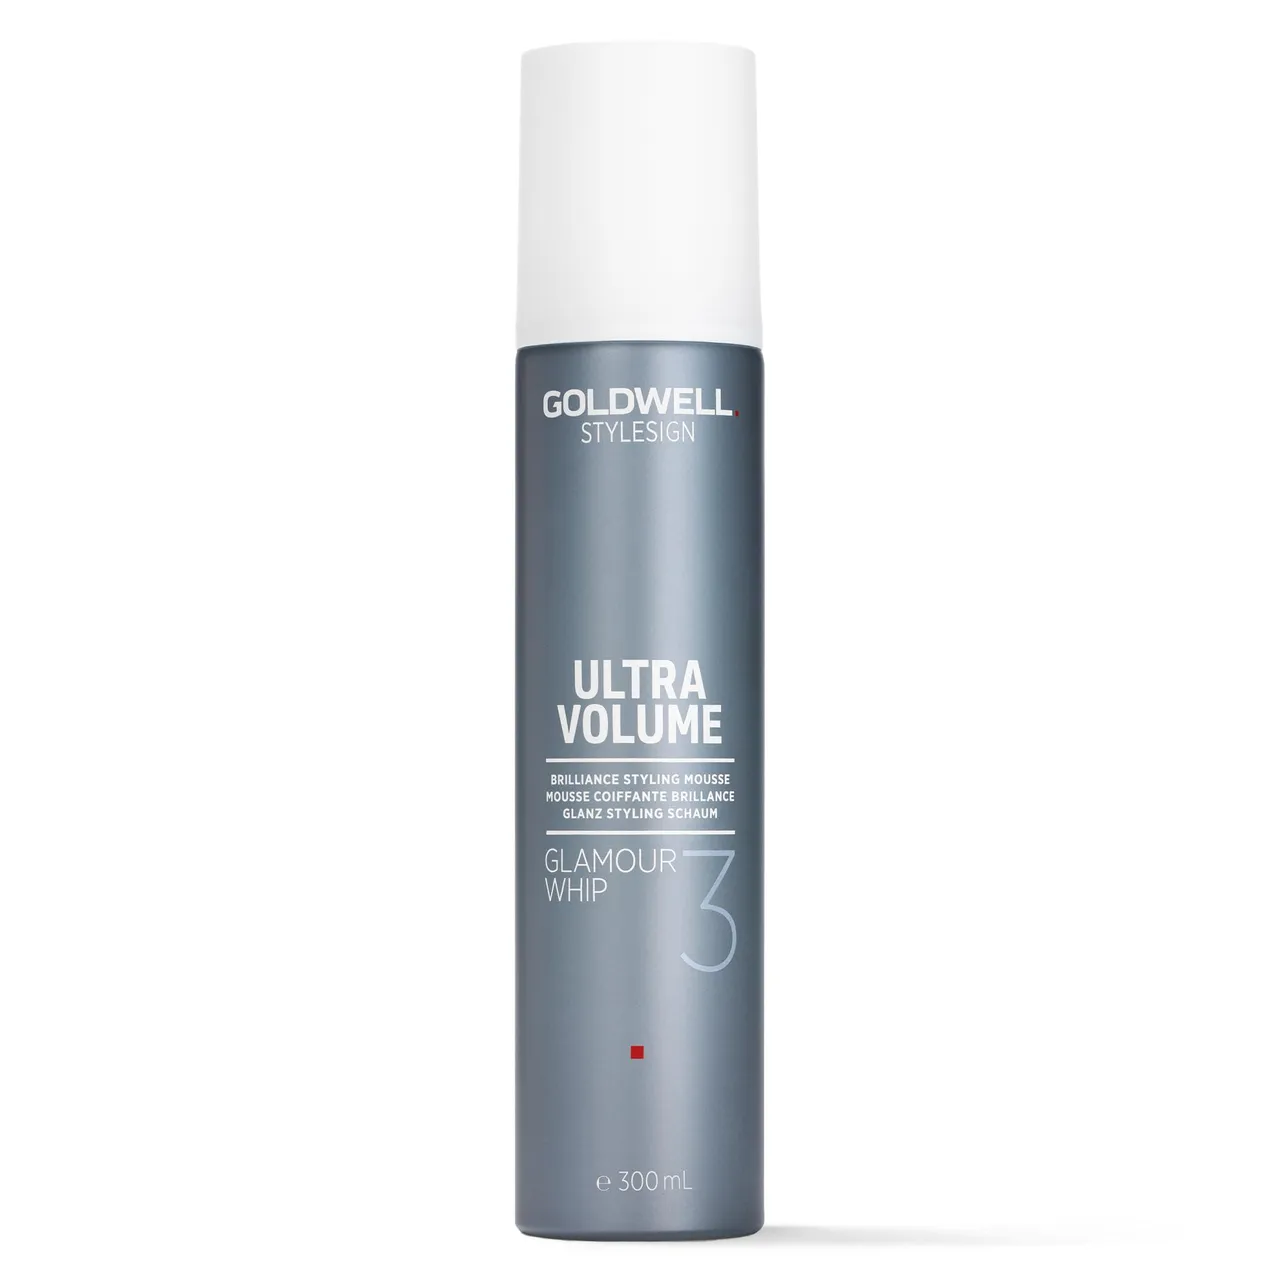 Goldwell Sign Glamour White Mos